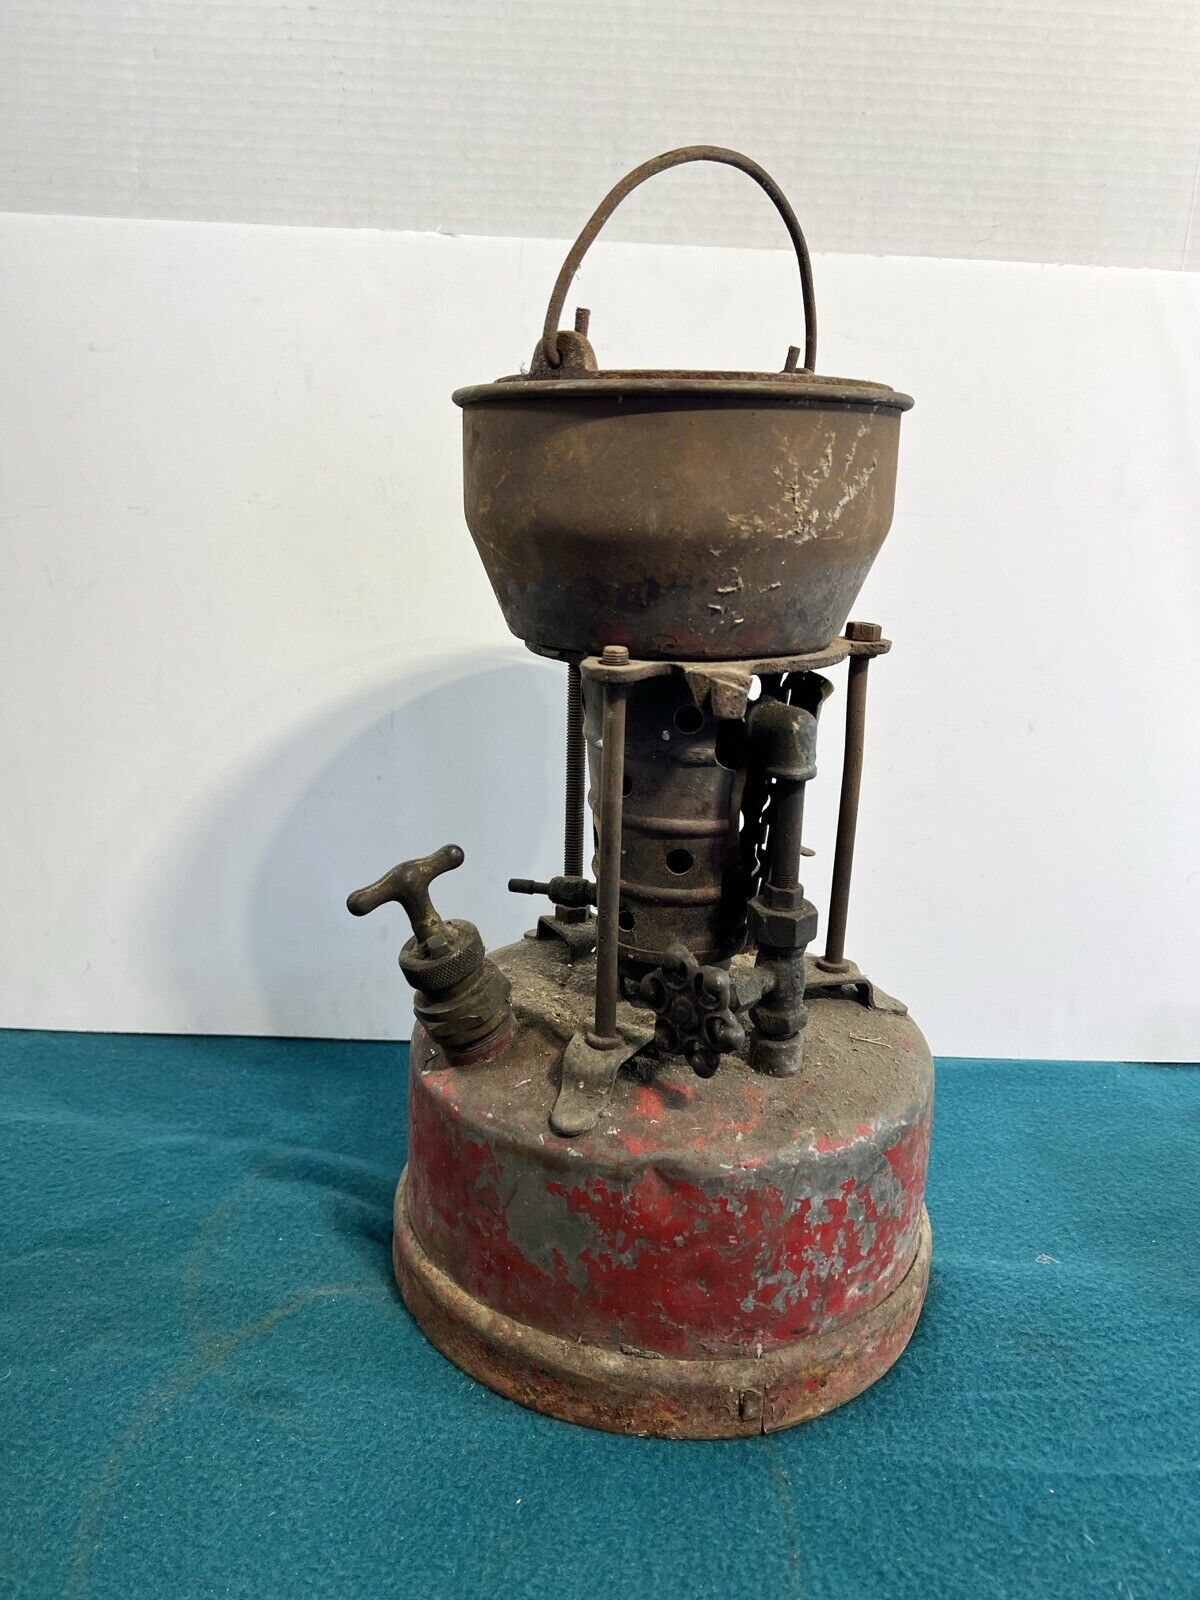 VINTAGE CLAYTON & LAMBERT MFG. CO. LEAD SMELTER - MADE IN USA -w/ Kettle Pot